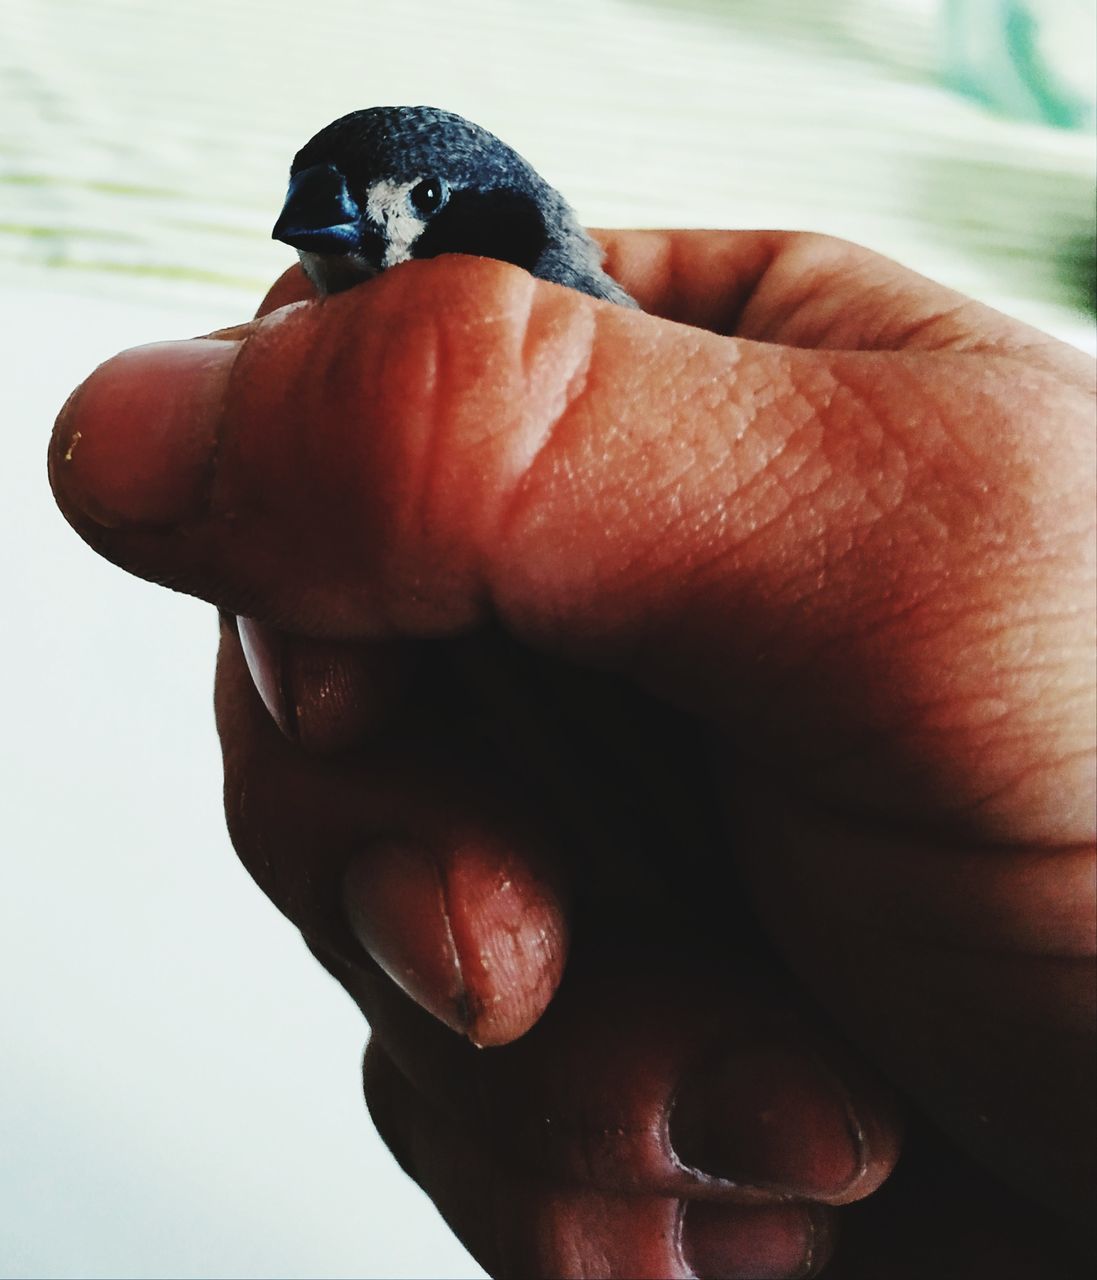 CLOSE-UP OF PERSON HAND HOLDING BIRD